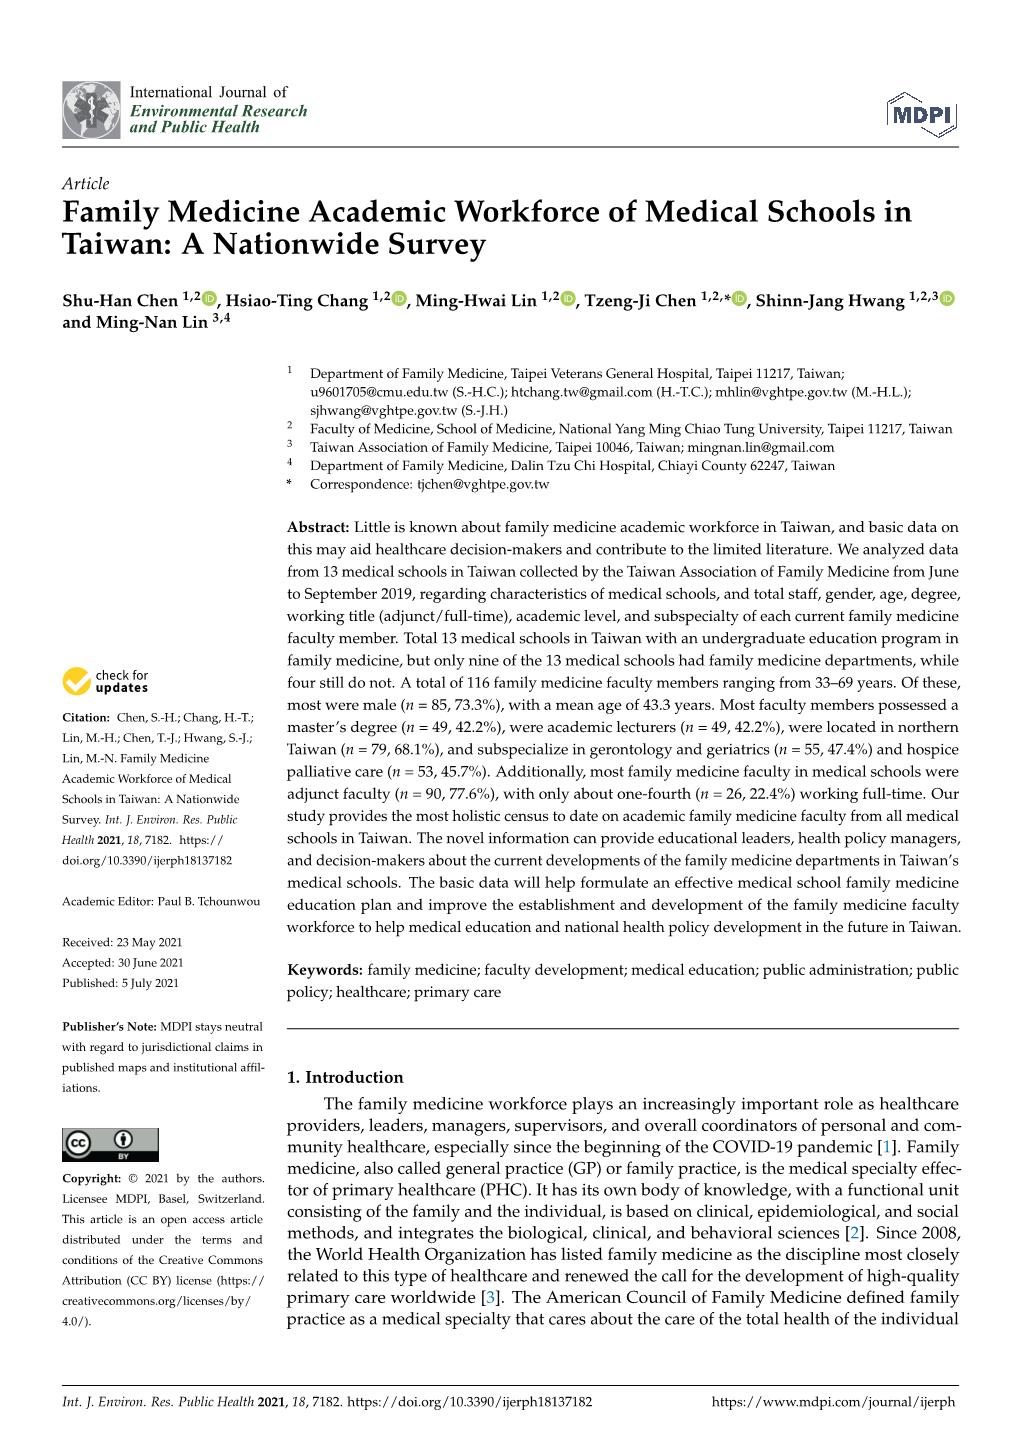 Family Medicine Academic Workforce of Medical Schools in Taiwan: a Nationwide Survey